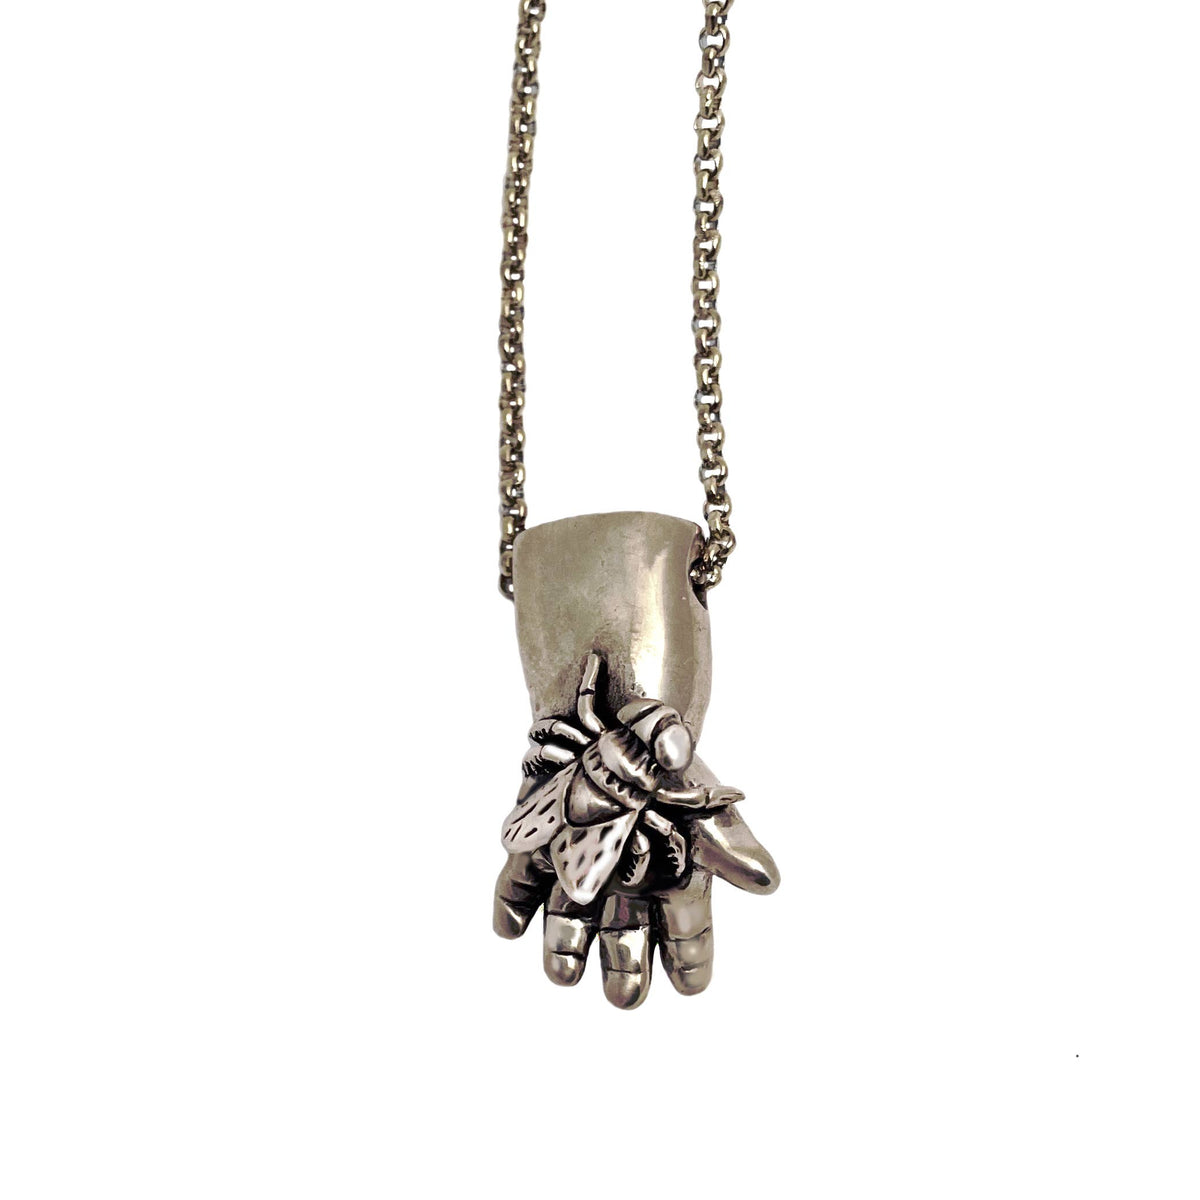 Fly in Hand Necklace